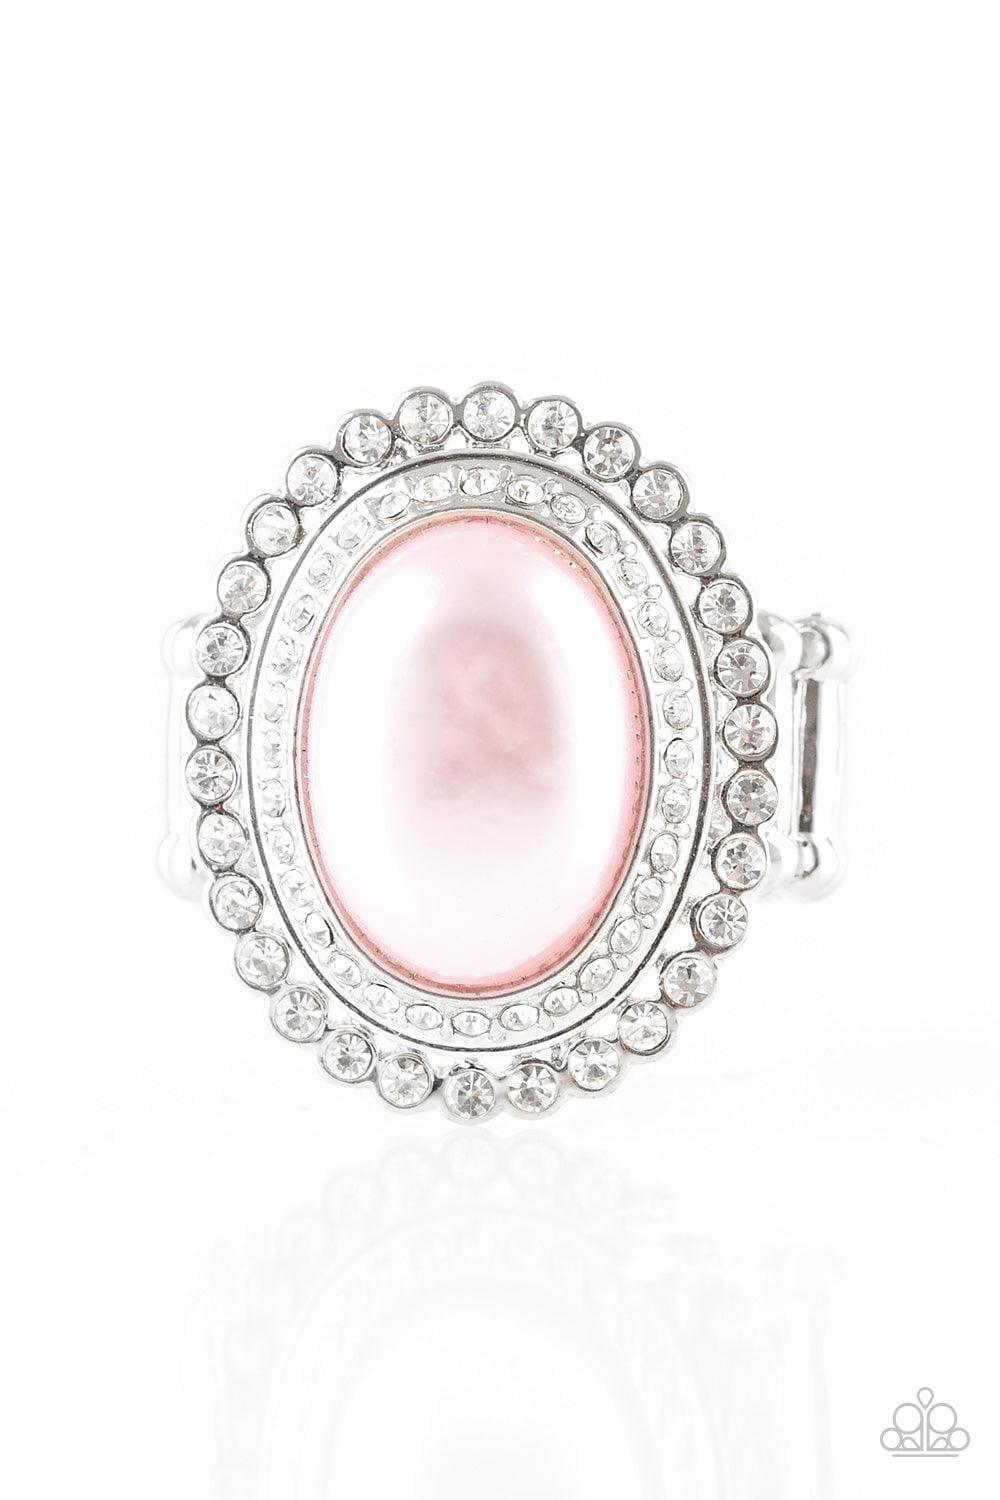 Paparazzi Accessories - Opulently Olympian - Pink Ring - Bling by JessieK